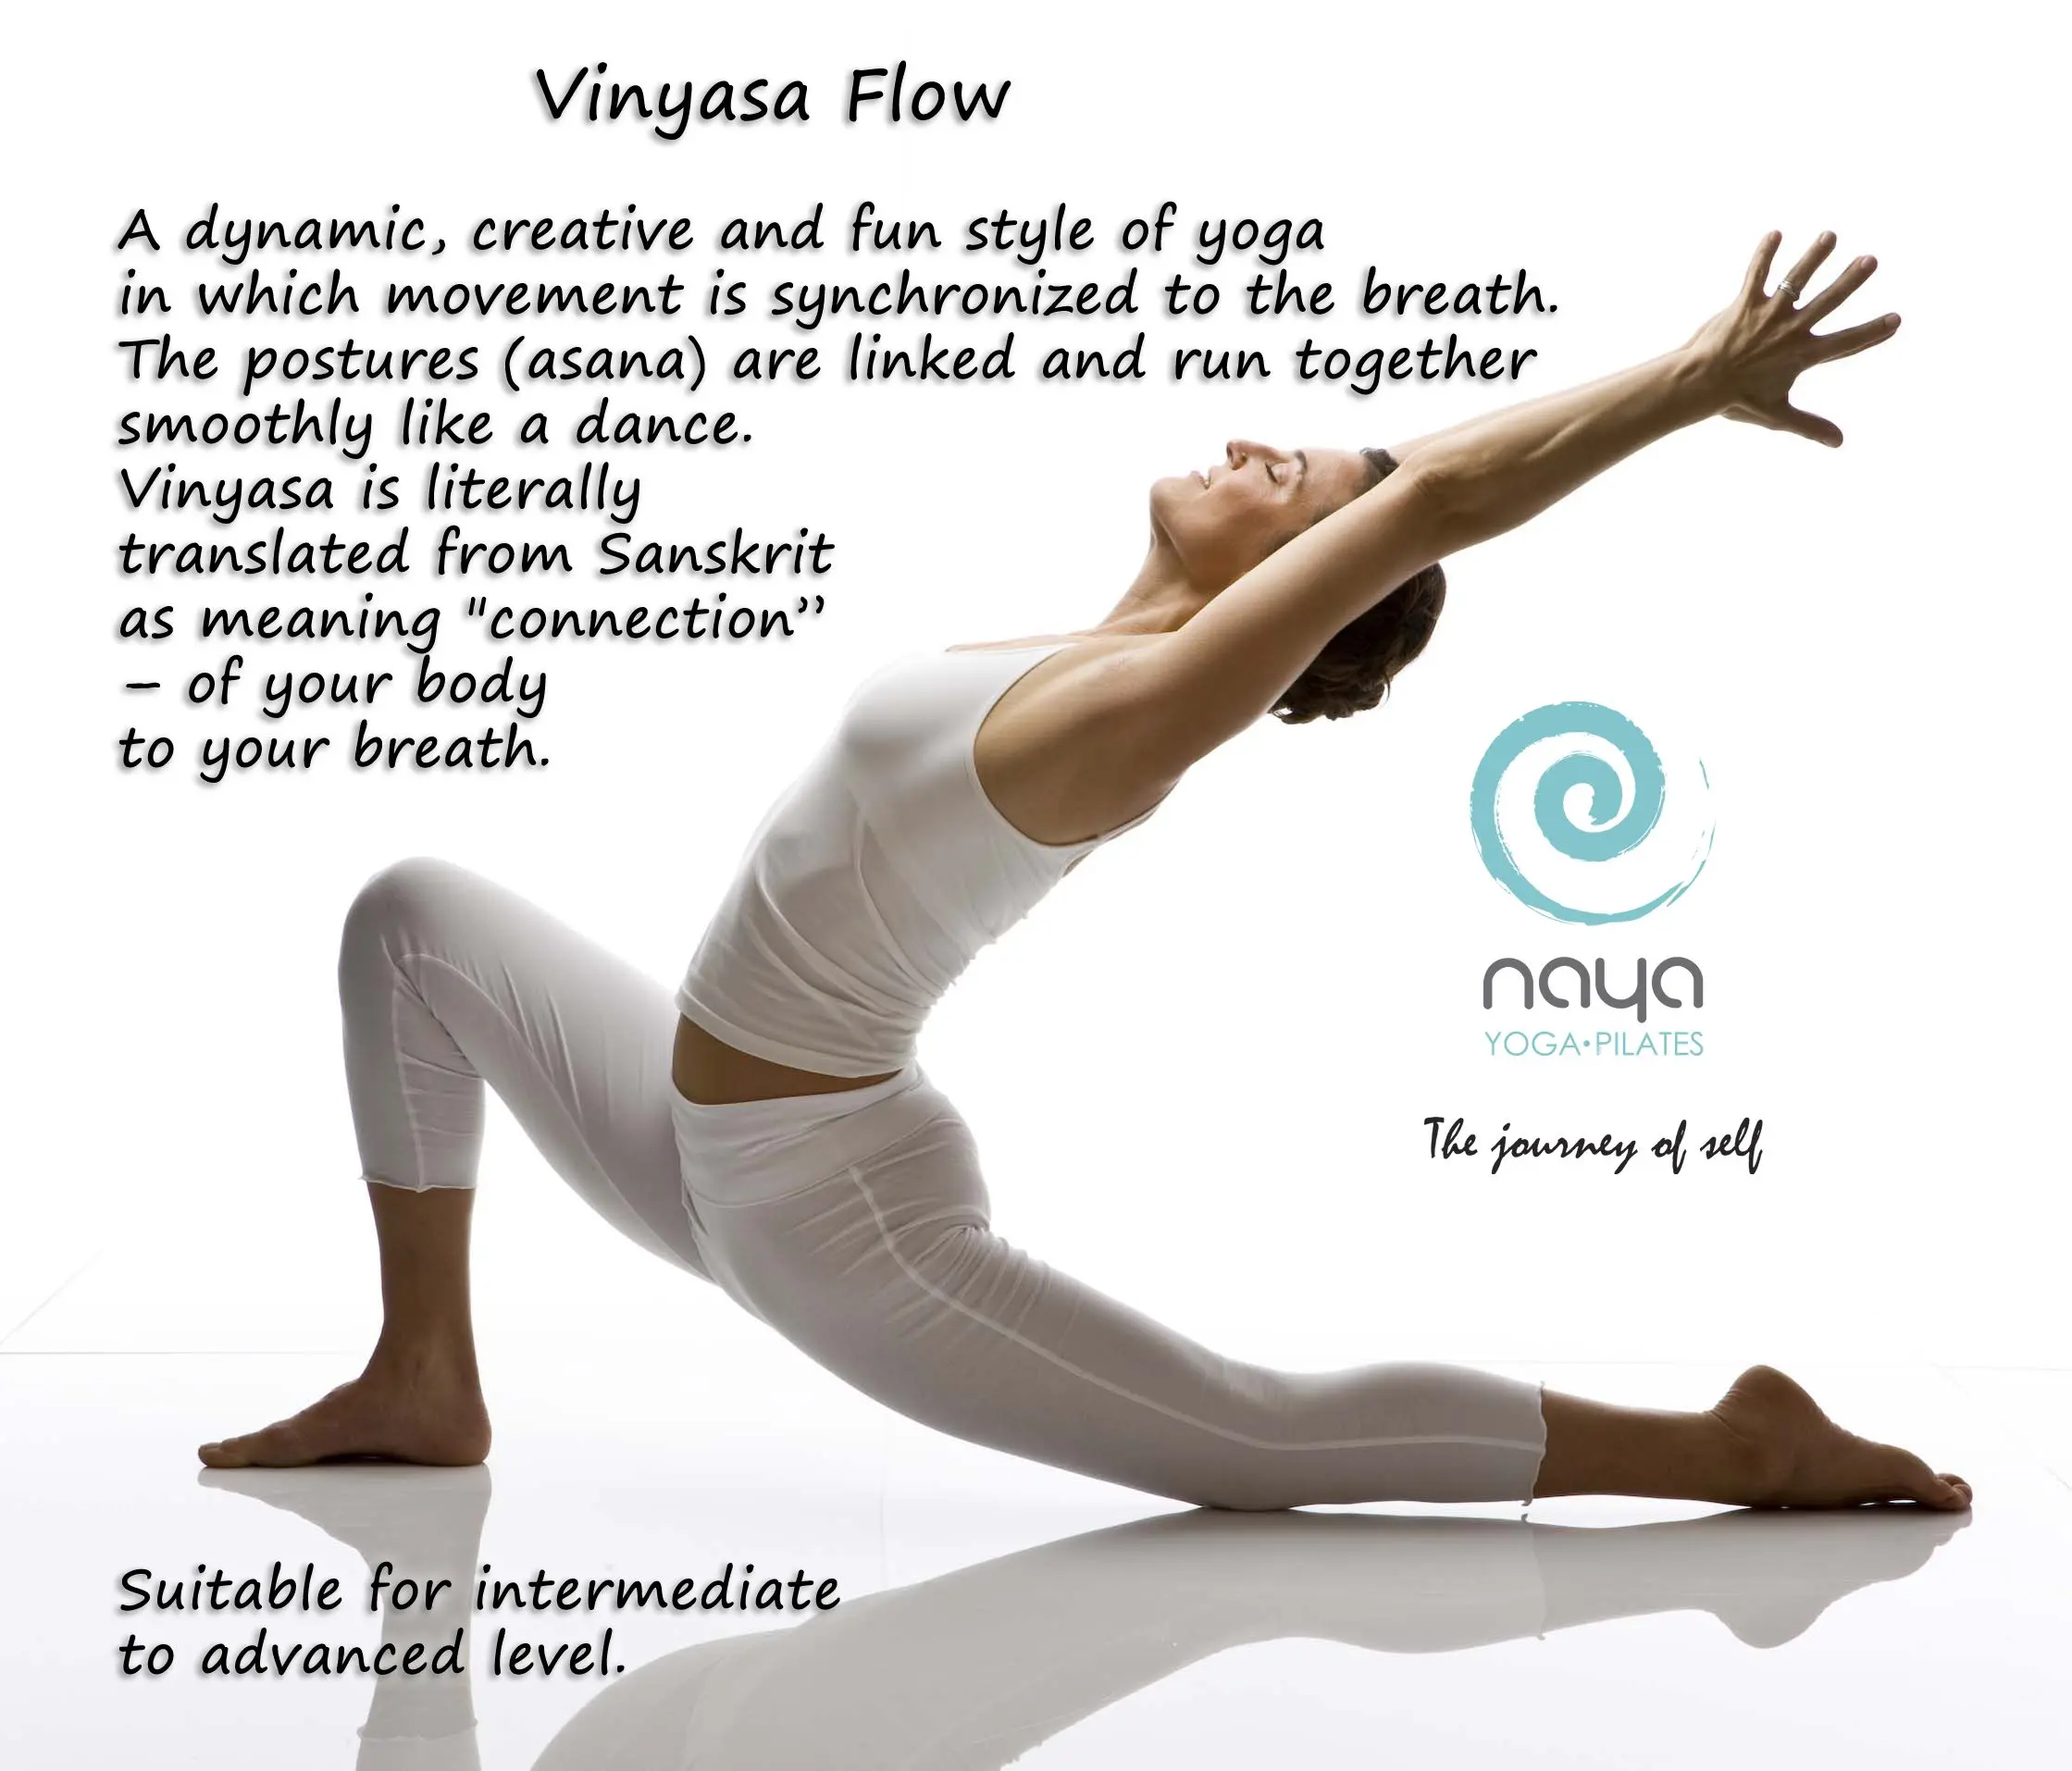 flow yoga description - What is the difference between flow and vinyasa yoga